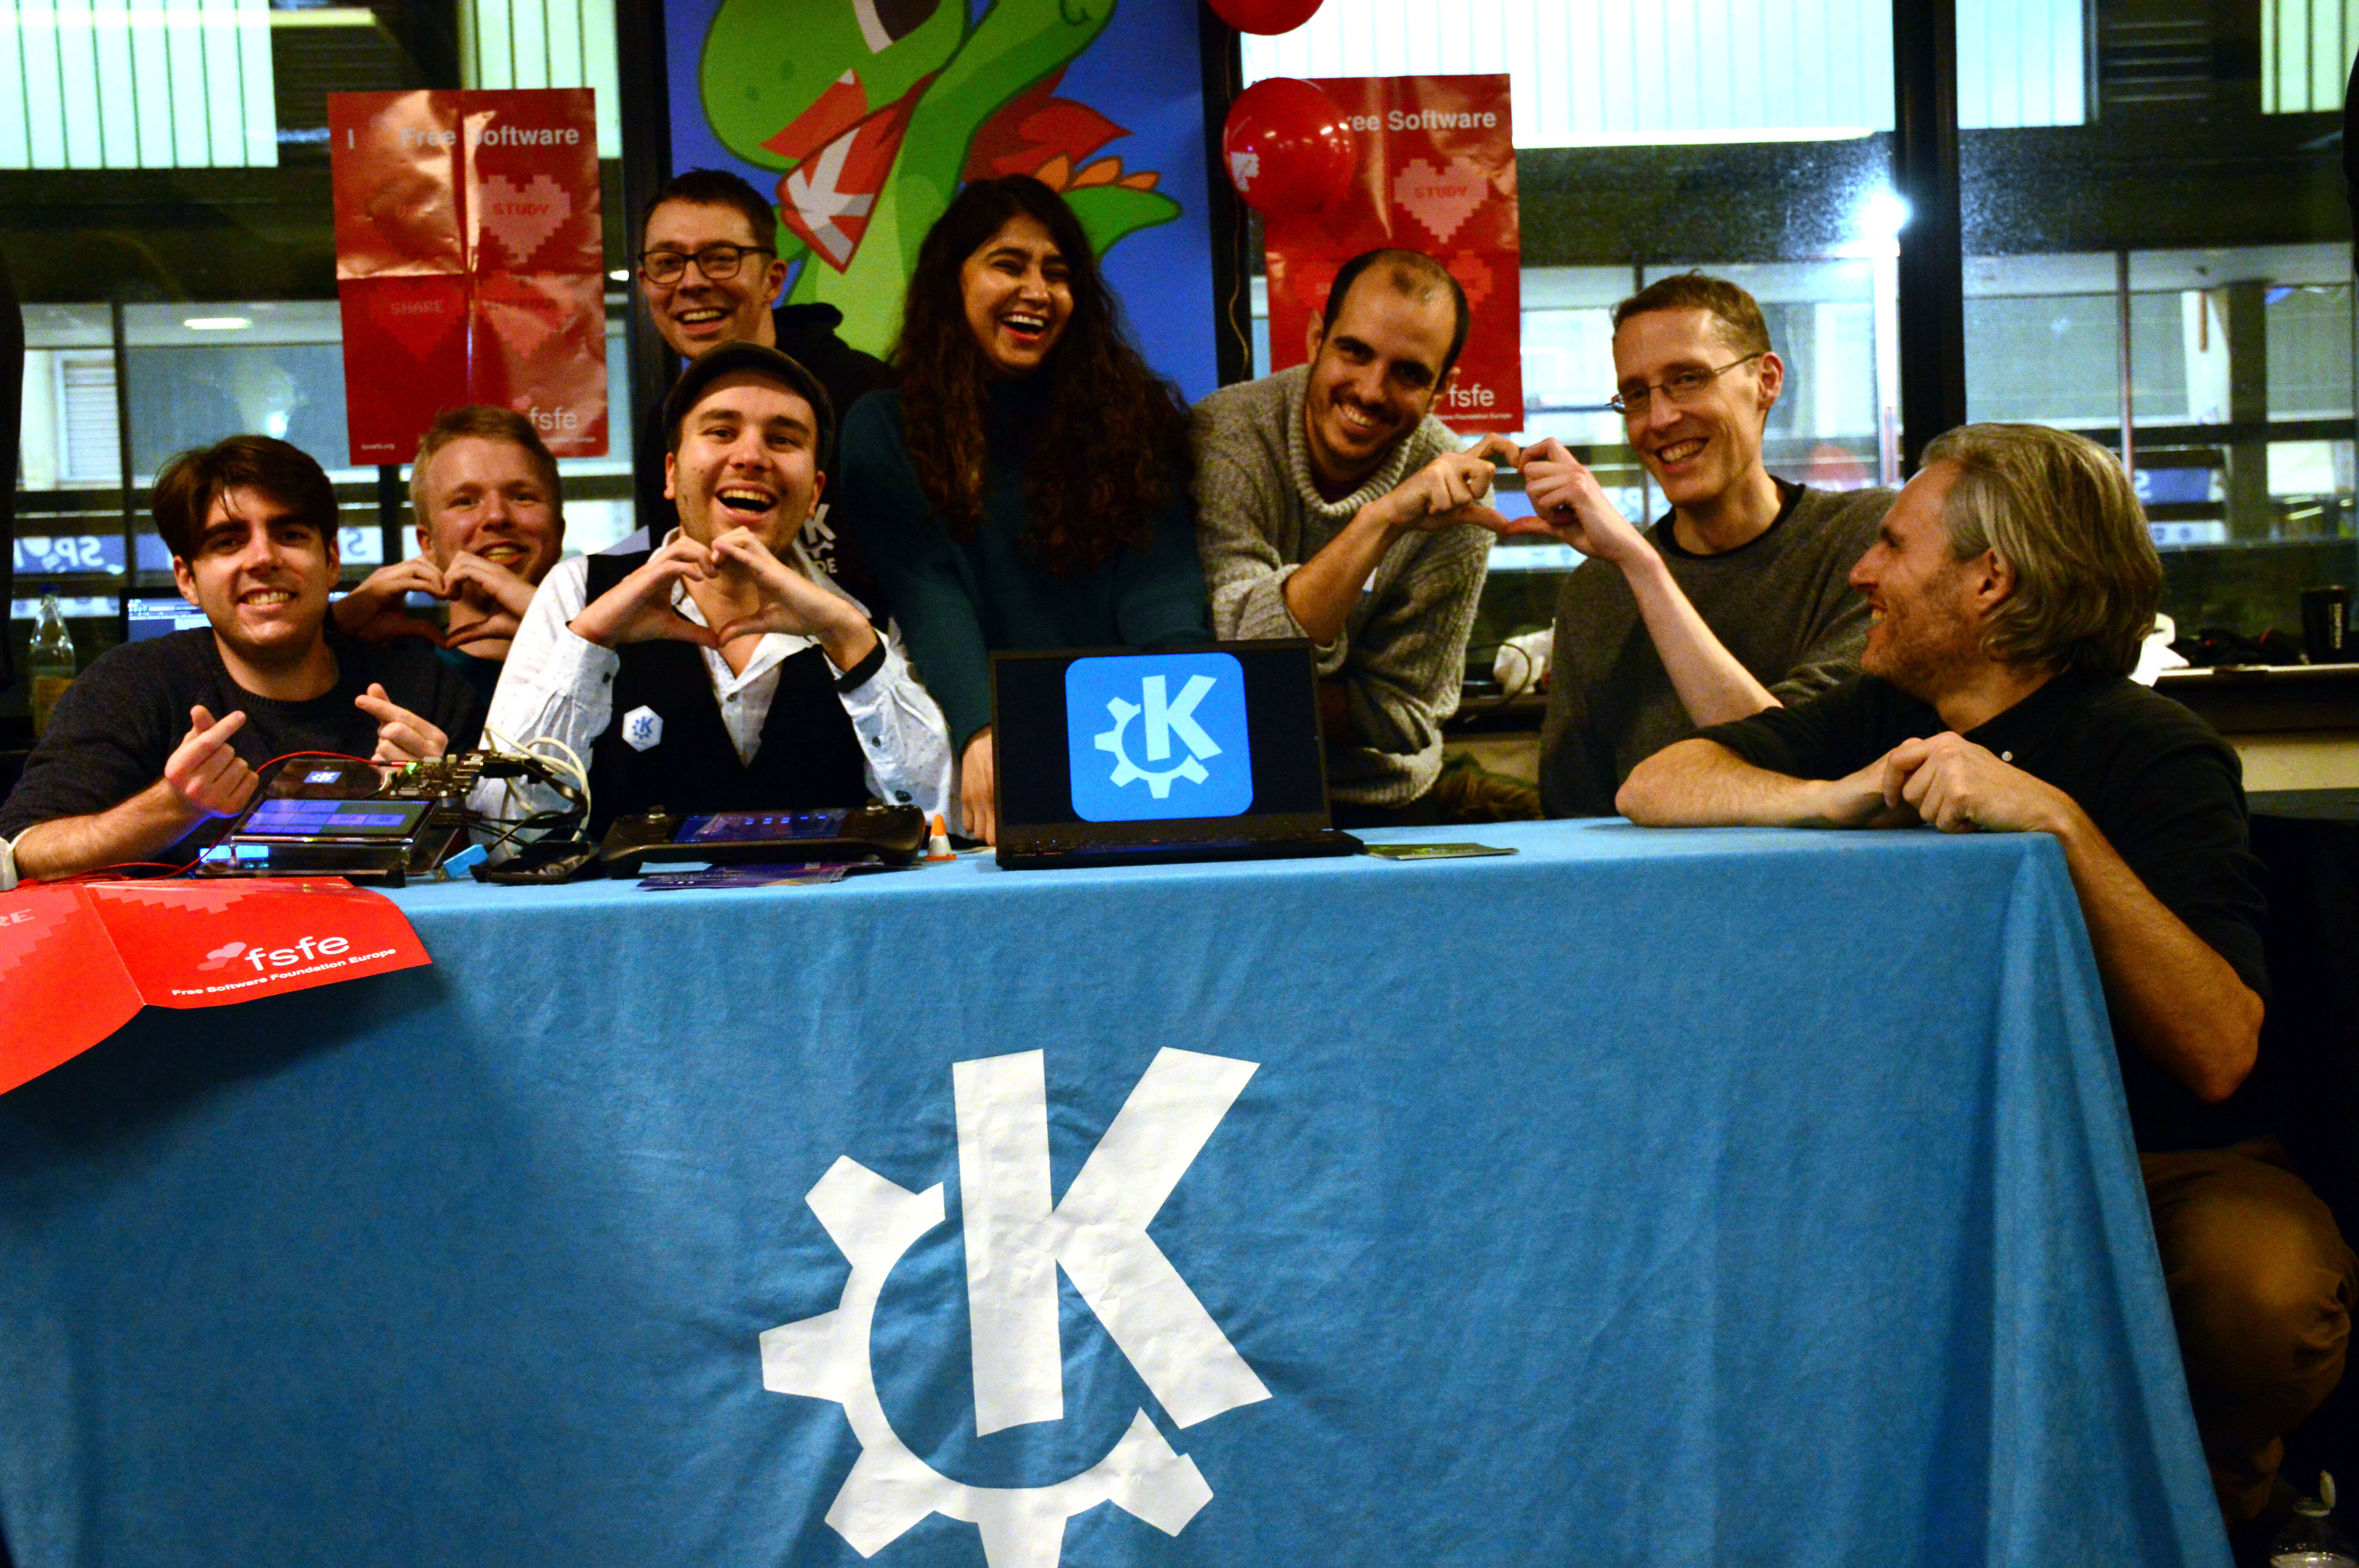 The KDE team expressing their ❤ for Free Software